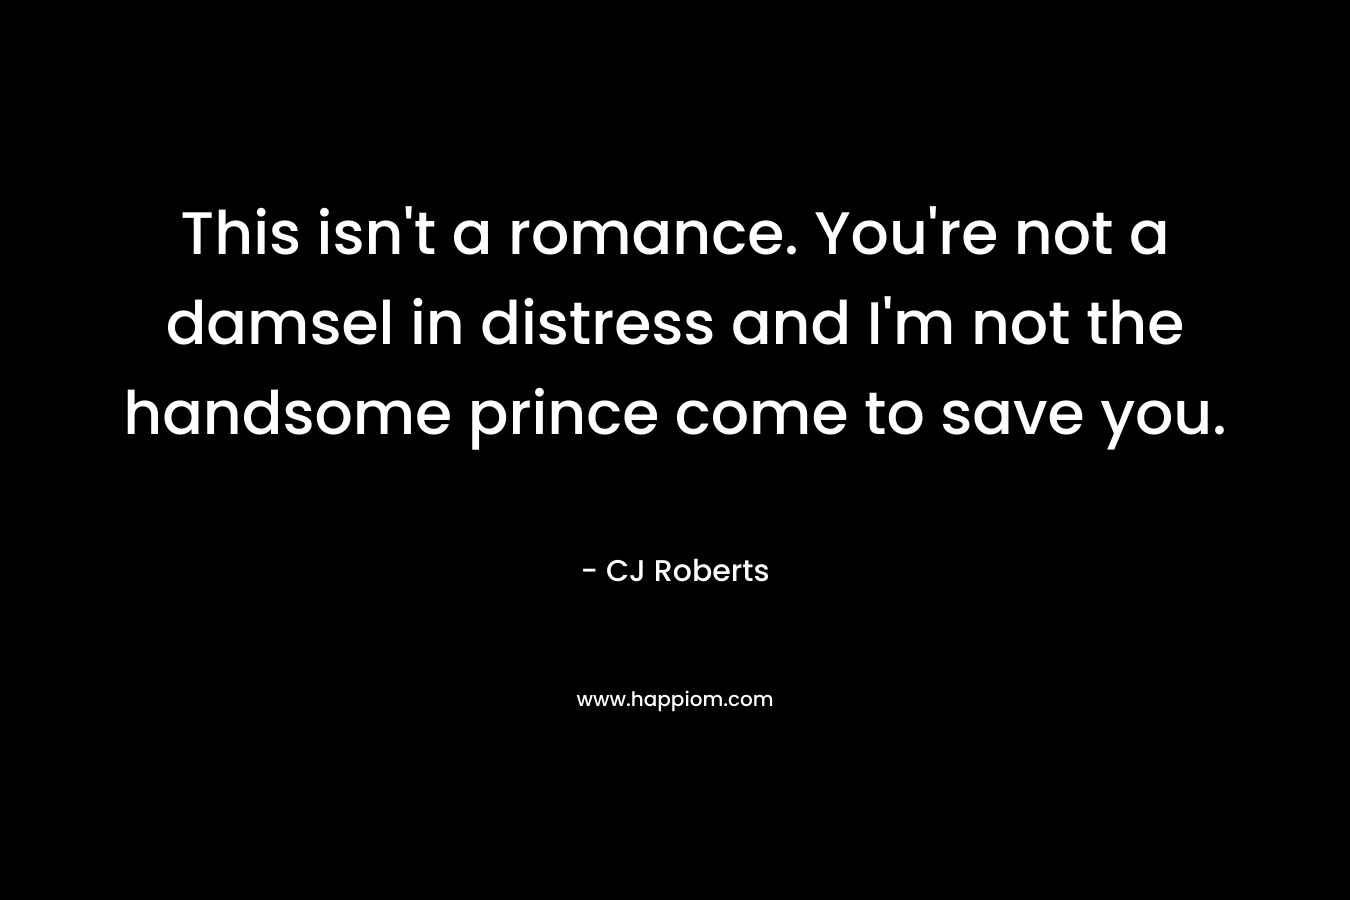 This isn’t a romance. You’re not a damsel in distress and I’m not the handsome prince come to save you. – CJ Roberts